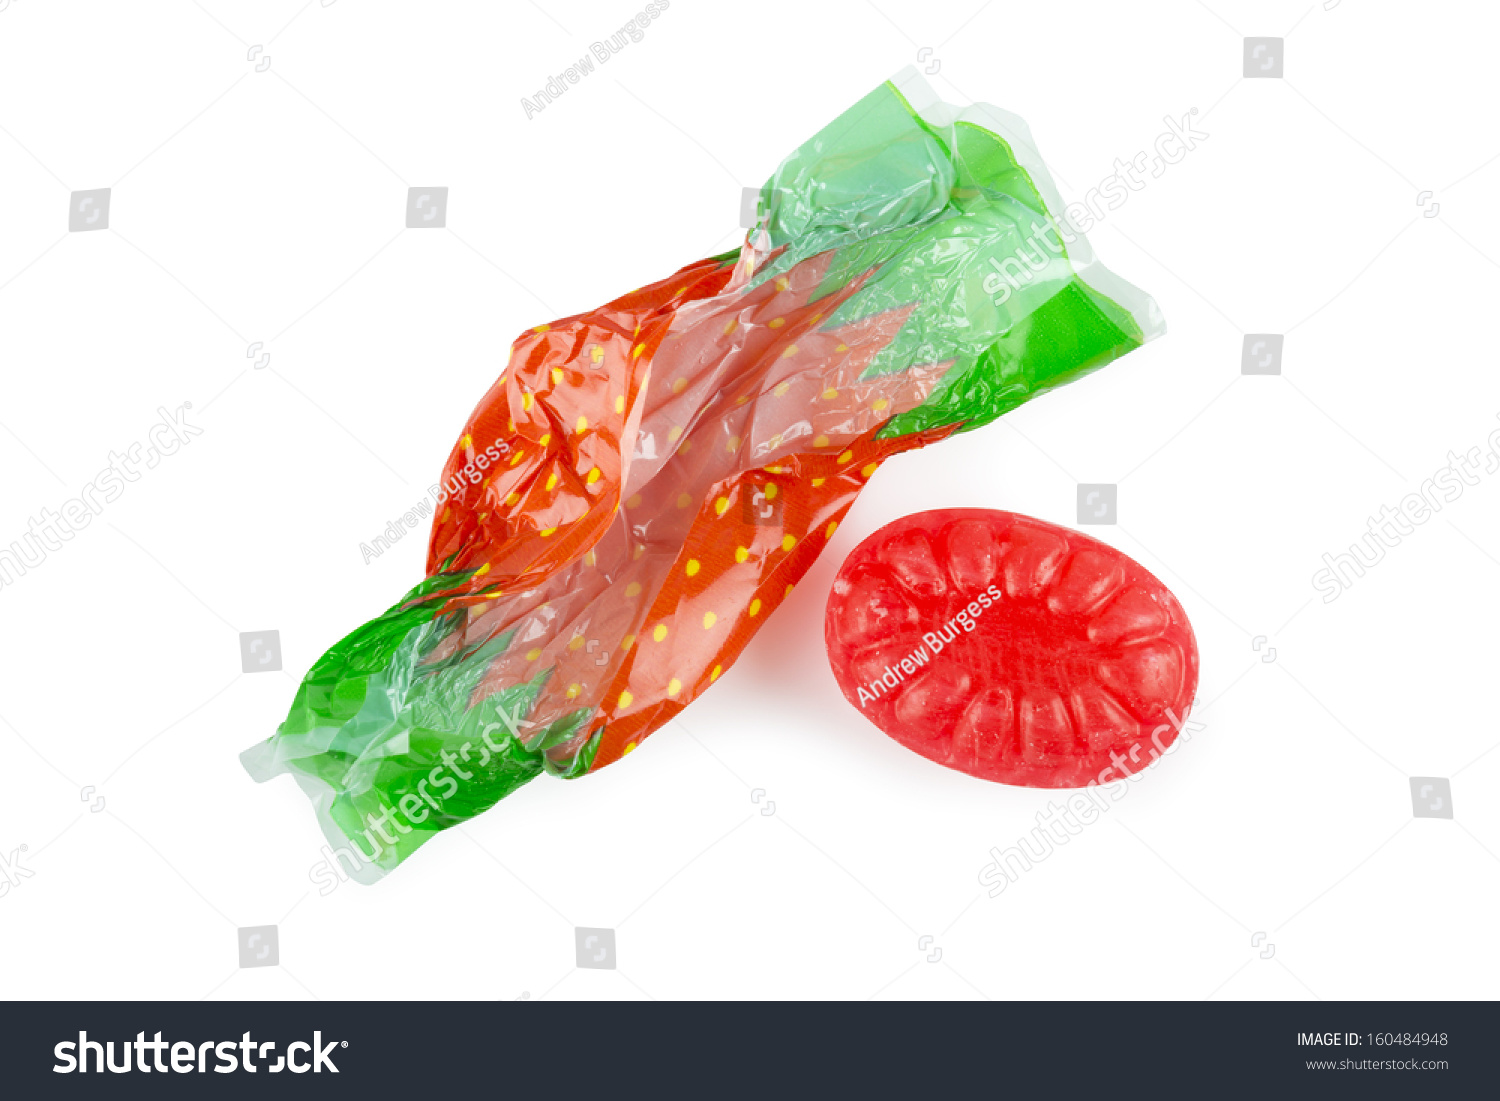 Candy Or Sweet Unwrapped On A White Background. Clipping Path Included ...